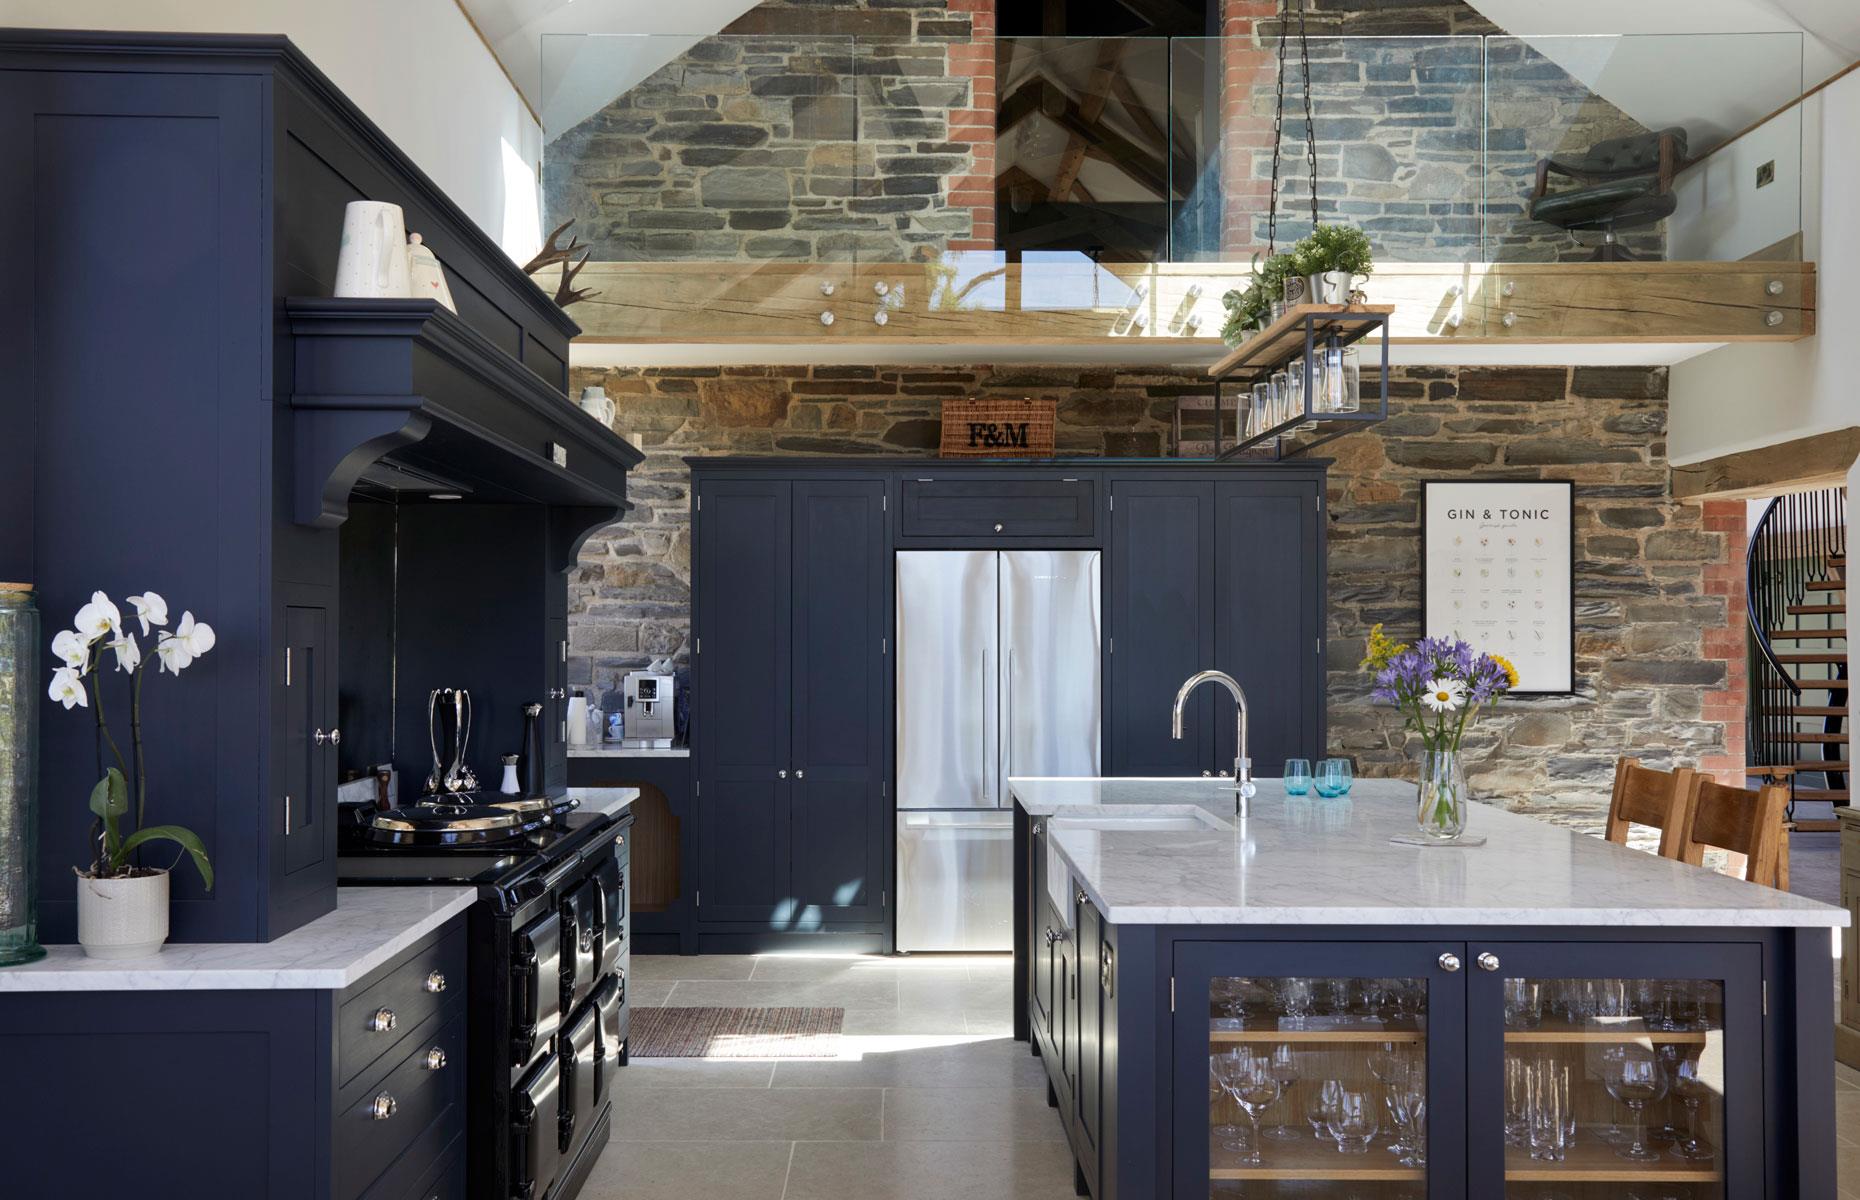 <p>If you have particularly high ceilings or are converting an airy barn-style space, think about incorporating a <a href="http://www.loveproperty.com/news/79911/from-atriums-to-mezzanines-7-ways-to-design-your-interior-floor-plan">mezzanine floor</a> into your design. Whether used as a seating nook, library or study, it will allow you to create a more intimate room within your airy open-plan living area. In this scheme, translucent barriers add a contemporary feel while still allowing a seamless flow between the two levels.</p>